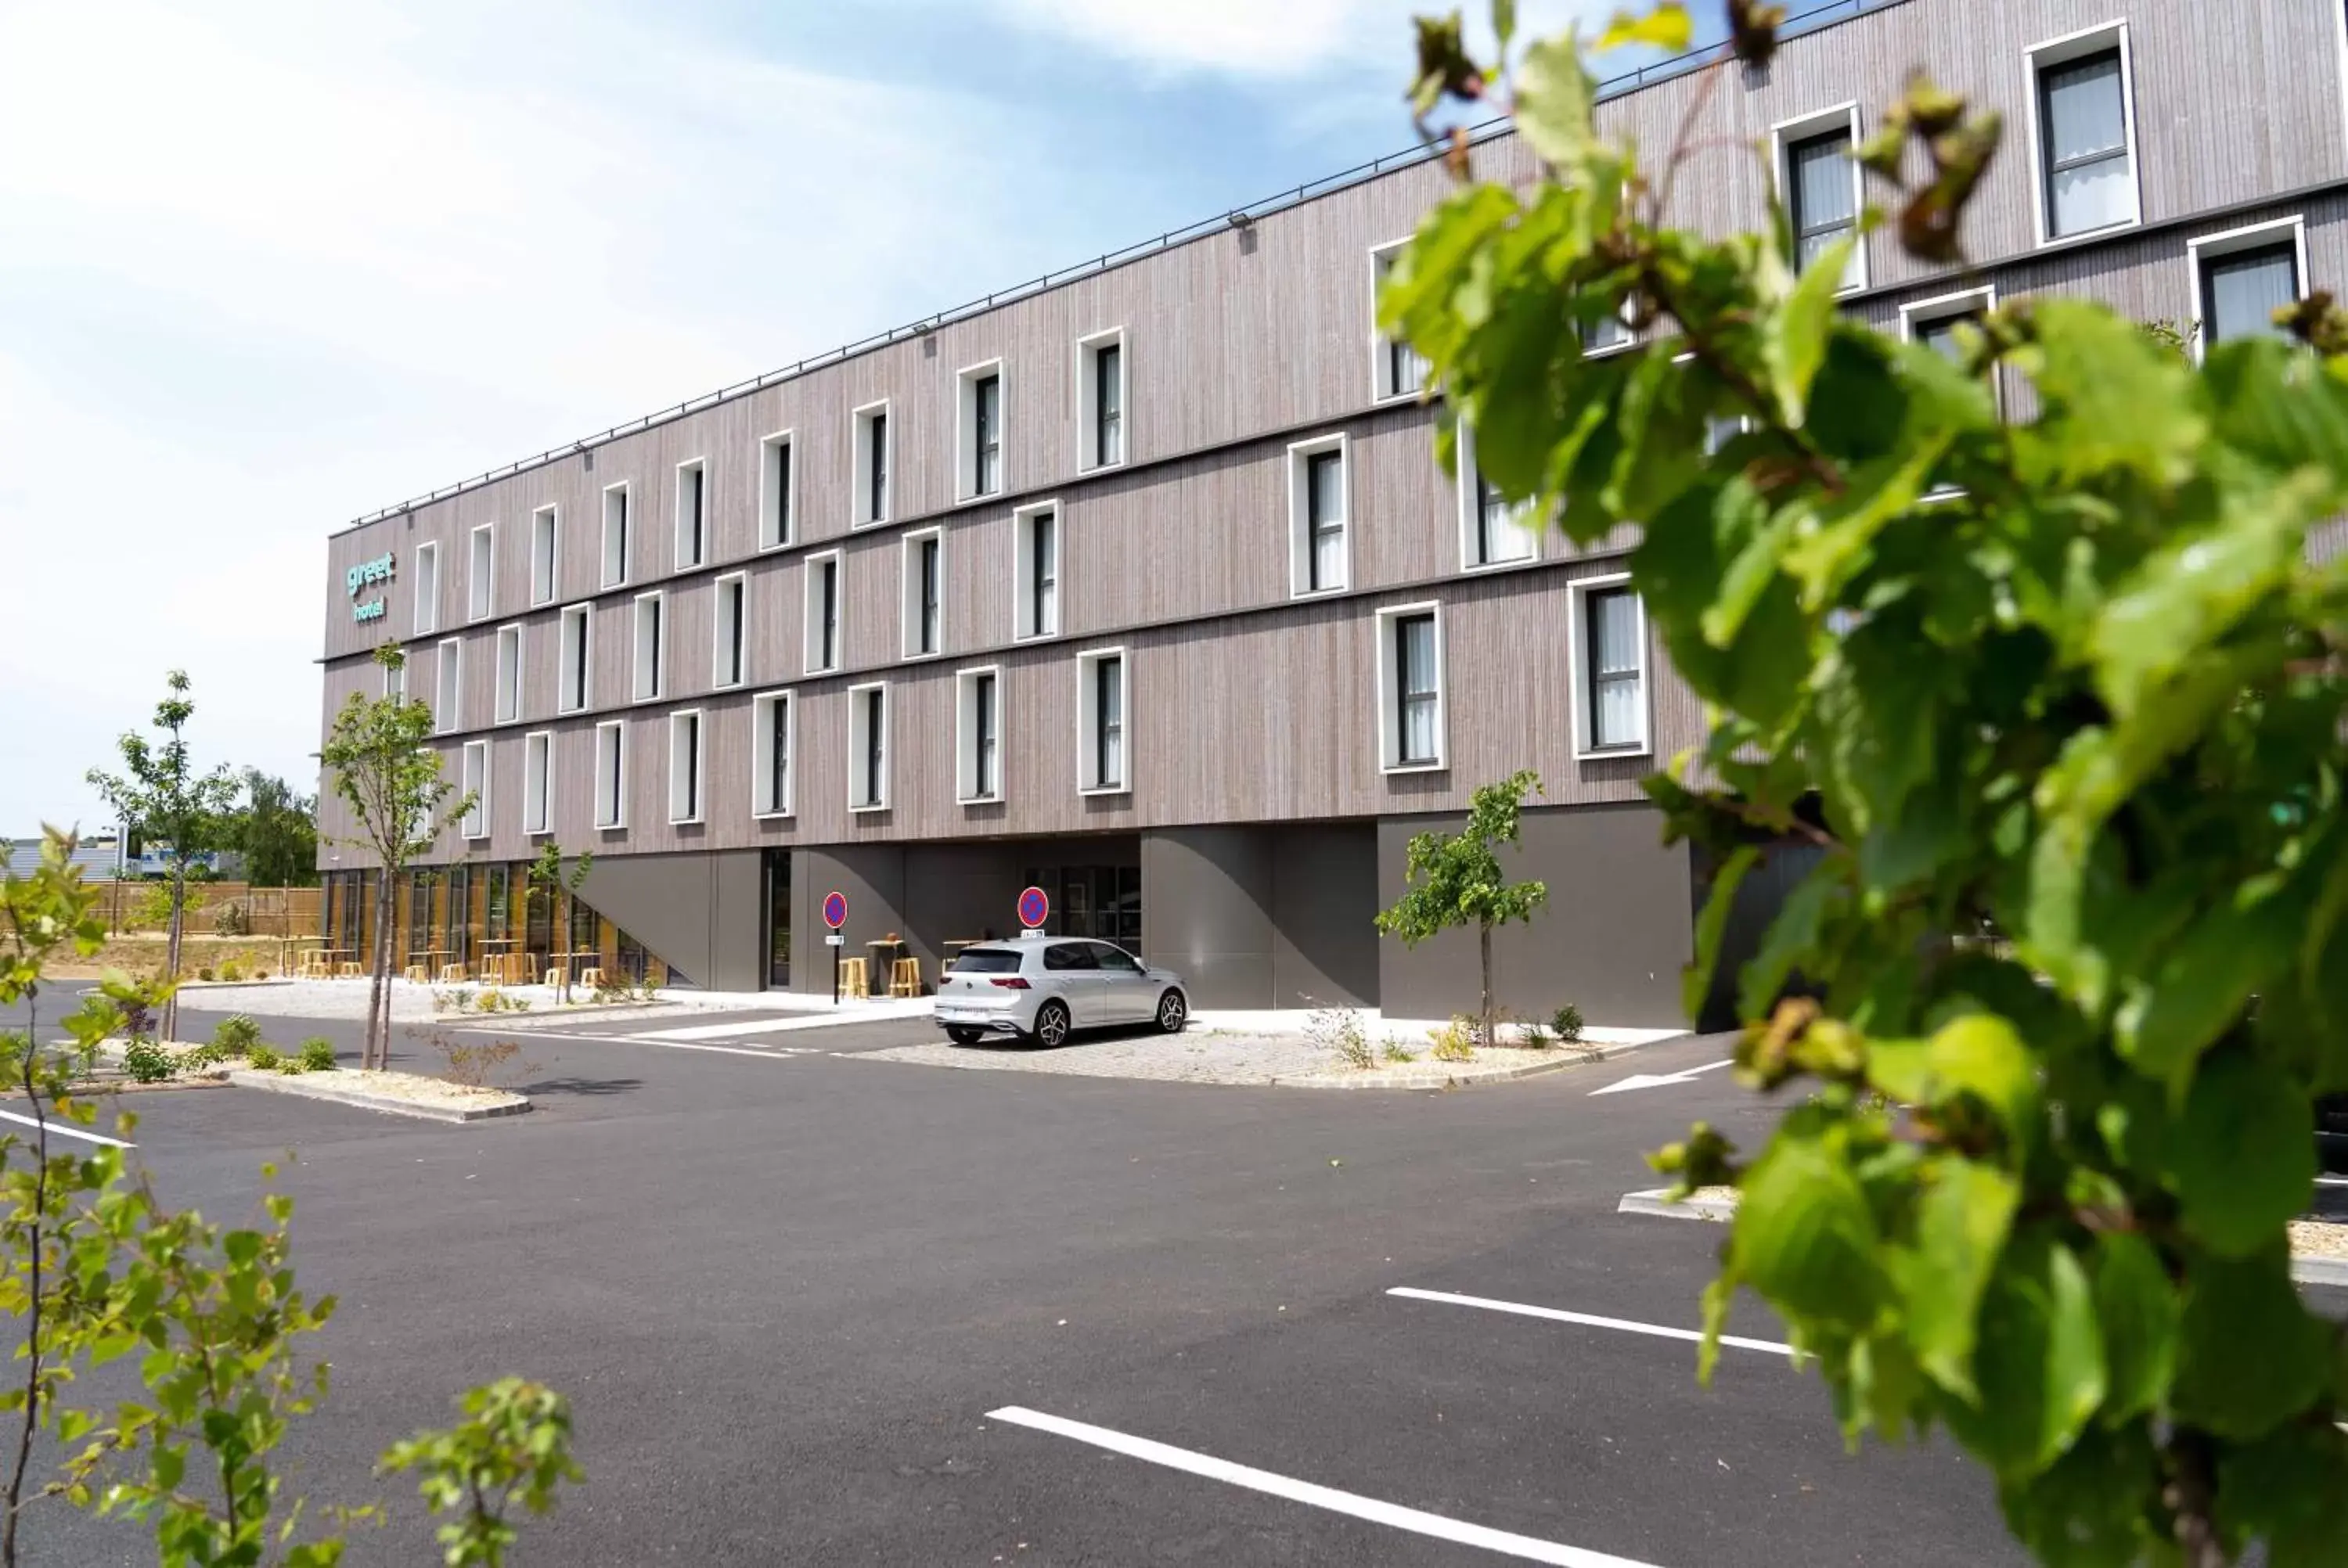 Property Building in greet Hotel Rennes Pace